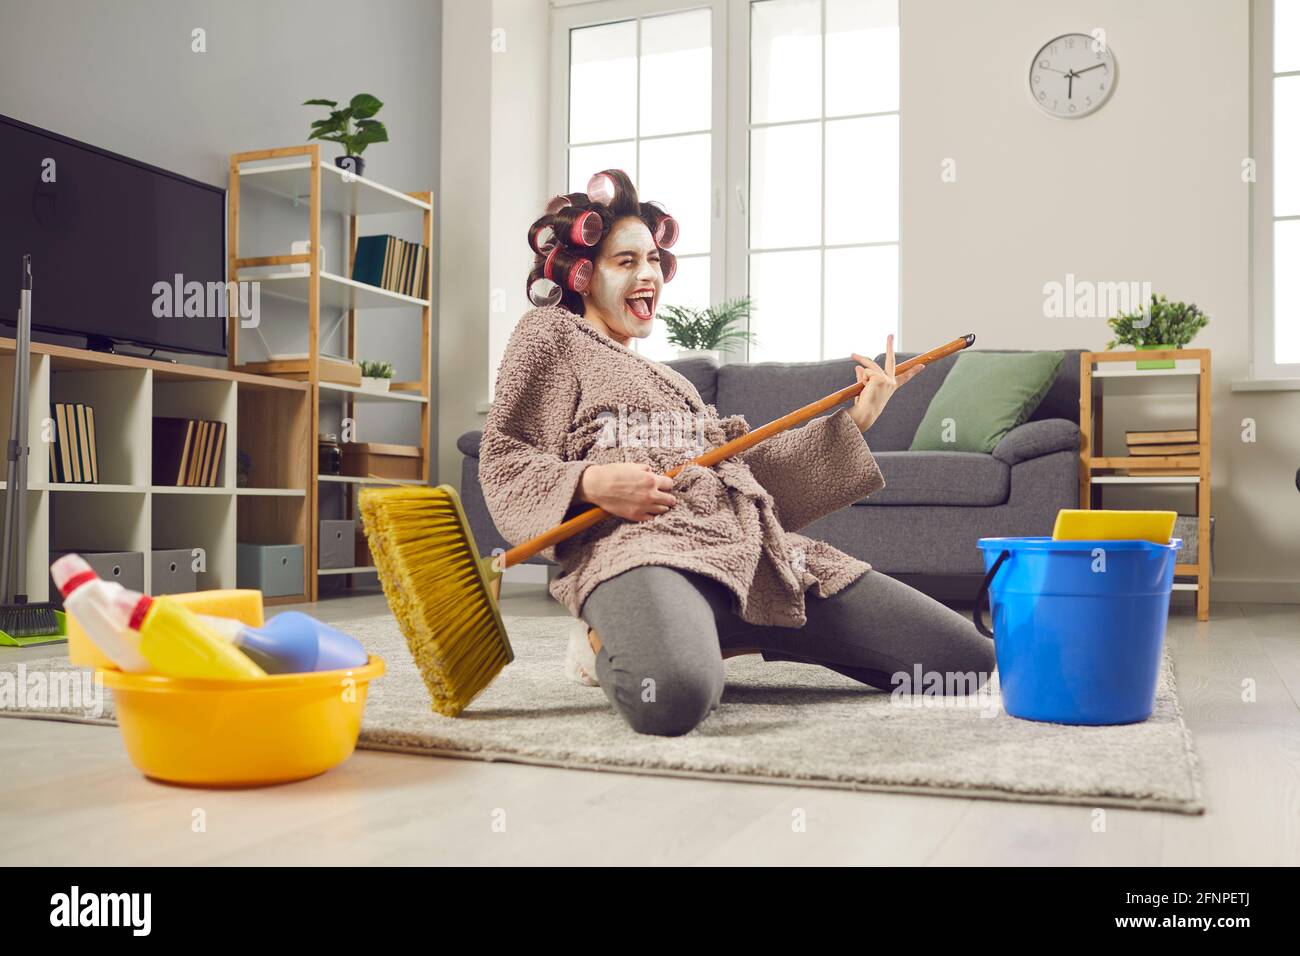 Funny housewife who cleans the house, sings and plays on a broom, as if on an imaginary guitar. Stock Photo